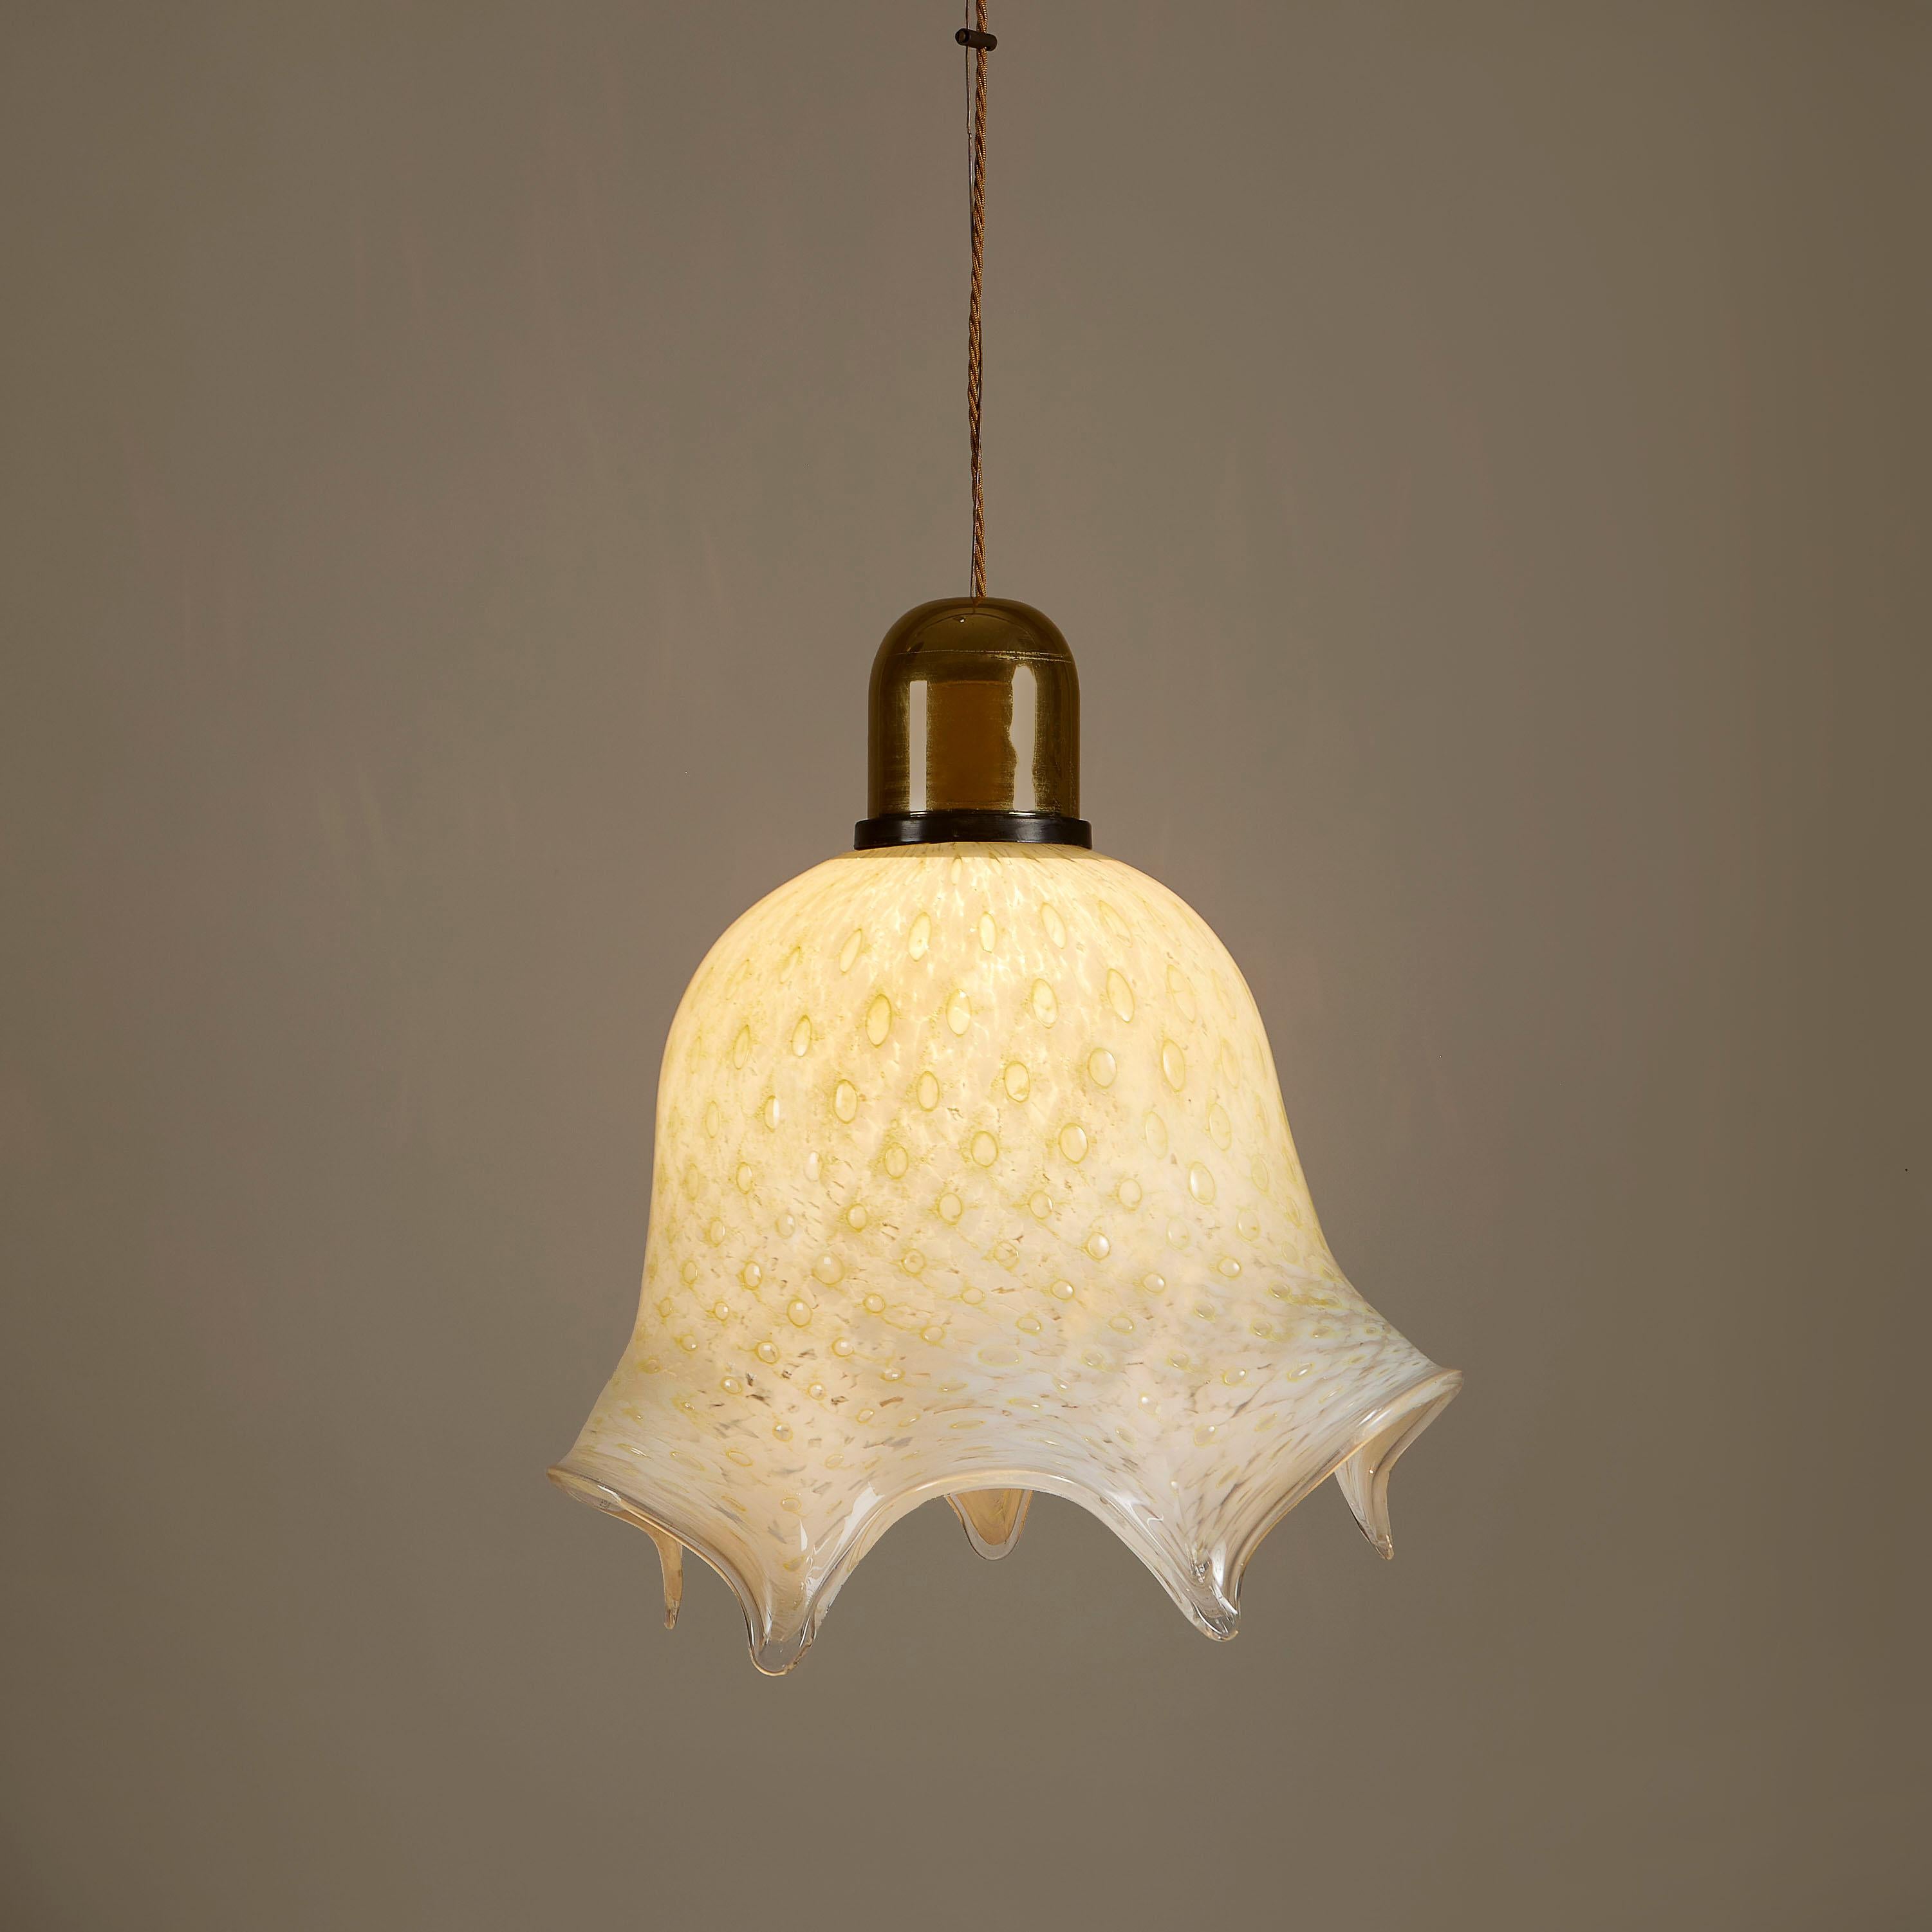 Handblown Murano glass sculpted into curved handkerchief shape using the fazzoletto technique. Substantial glass pendant but the patterning inside the glass gives the effect of delicate lace. Brass domed fitting and ceiling rose. Height can be